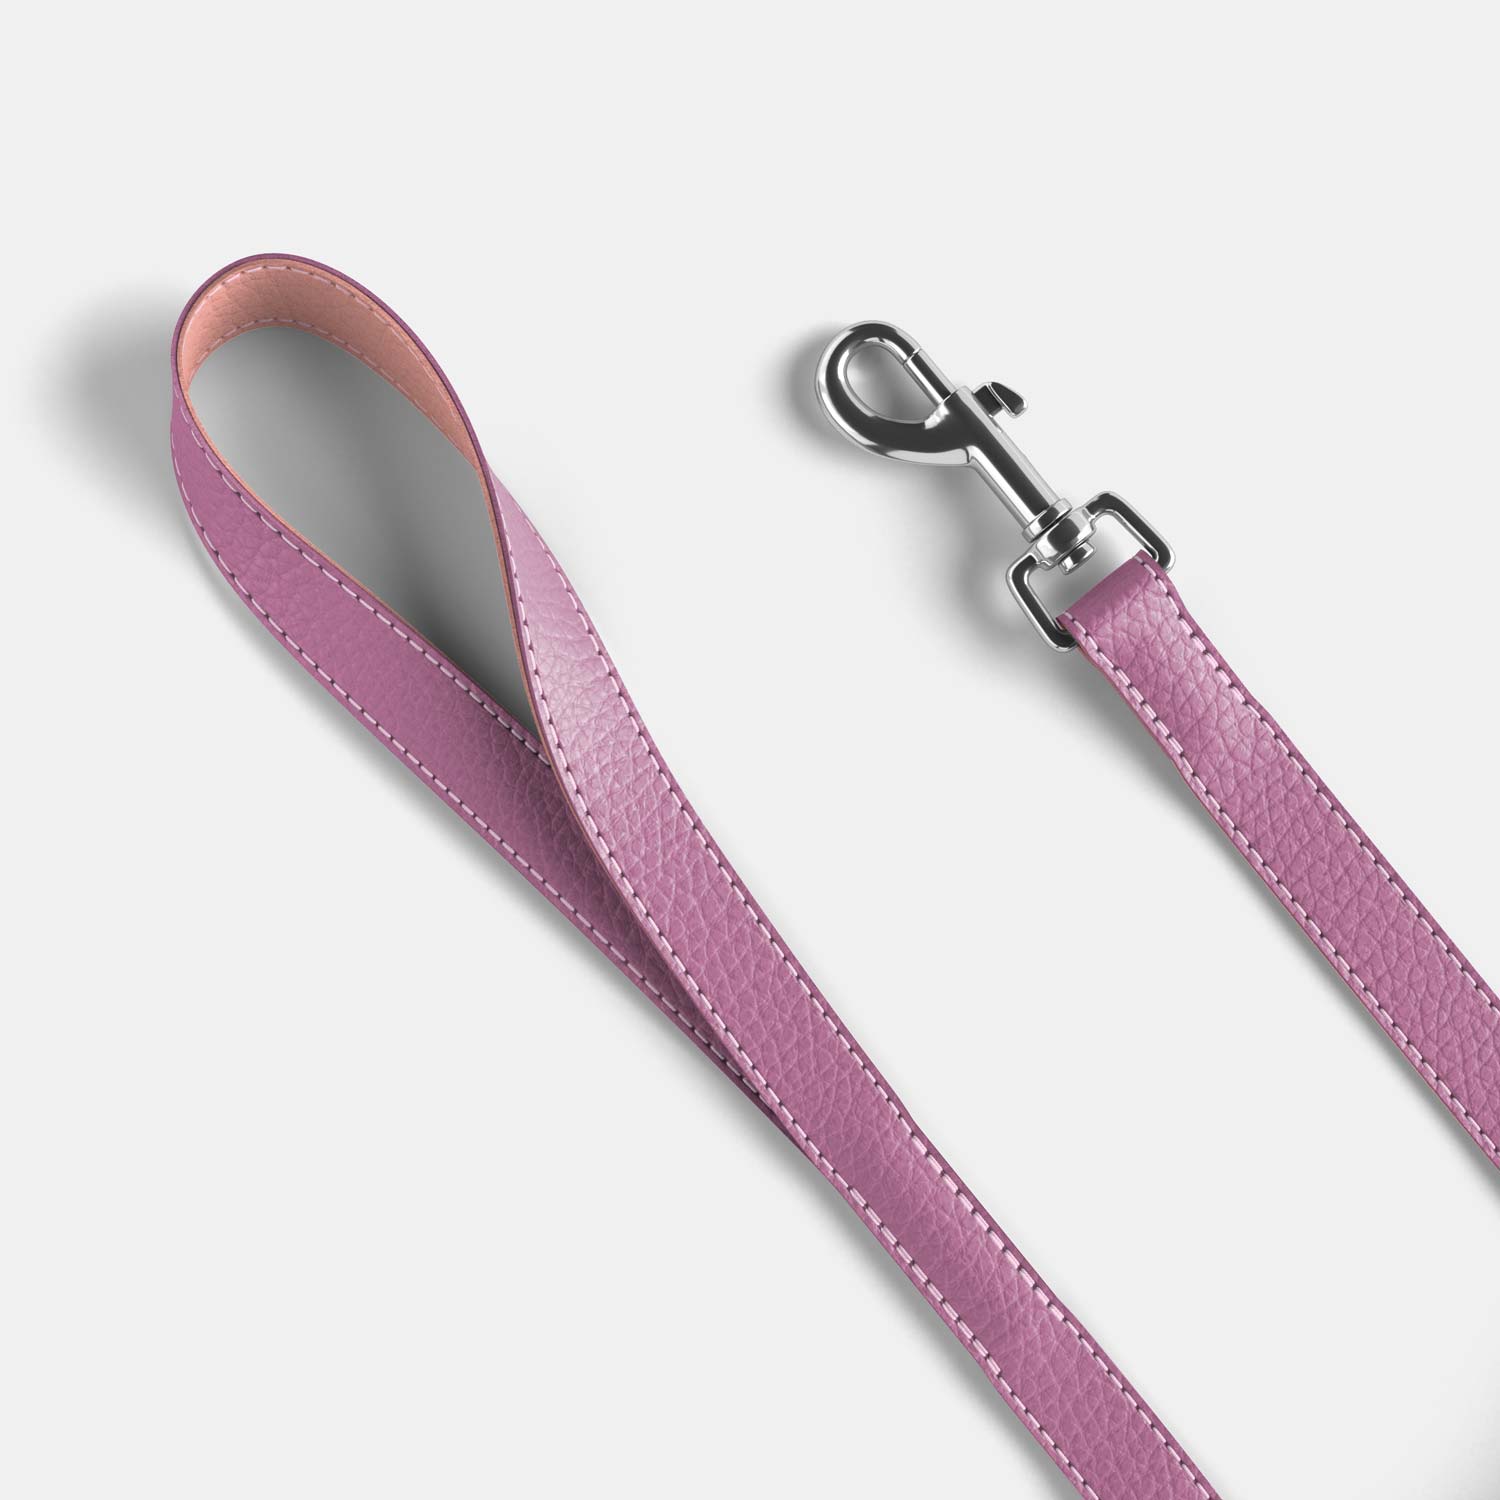 Leather Dog Lead - Grey and Coral